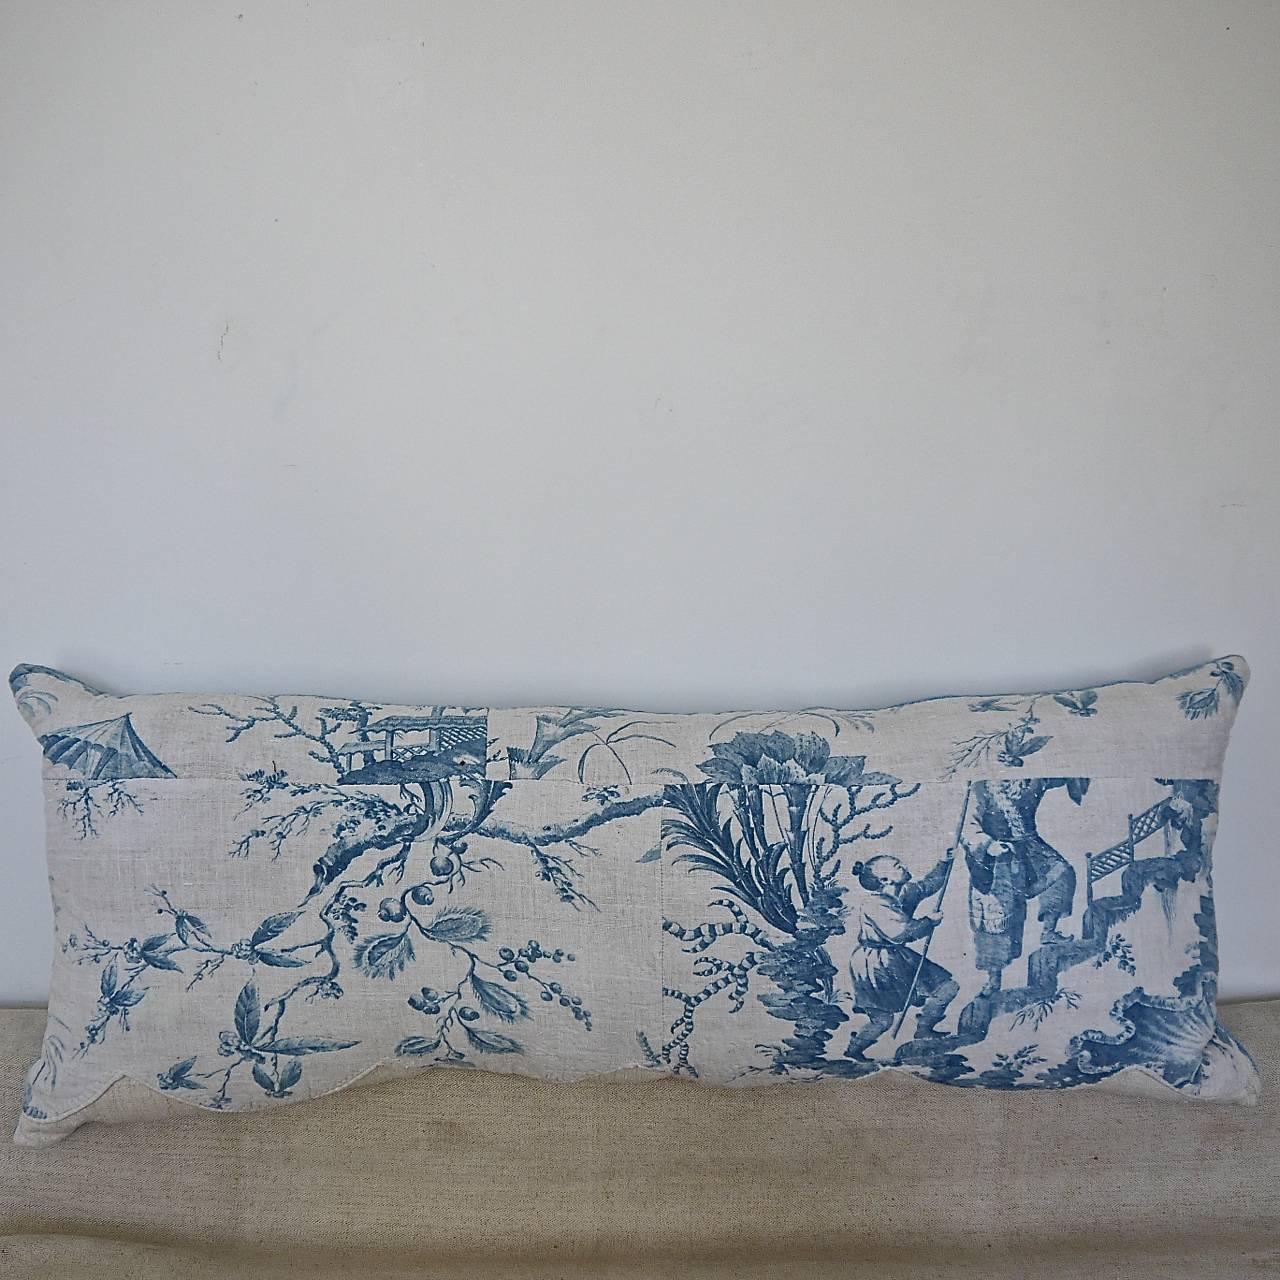  18th century French blue Chinoiserie cotton cushion made from a pelmet with its original patched pieces of large scale flowers,figures and meandering branches.It retains its original scalloped edge which has been stitched onto a 19th century French